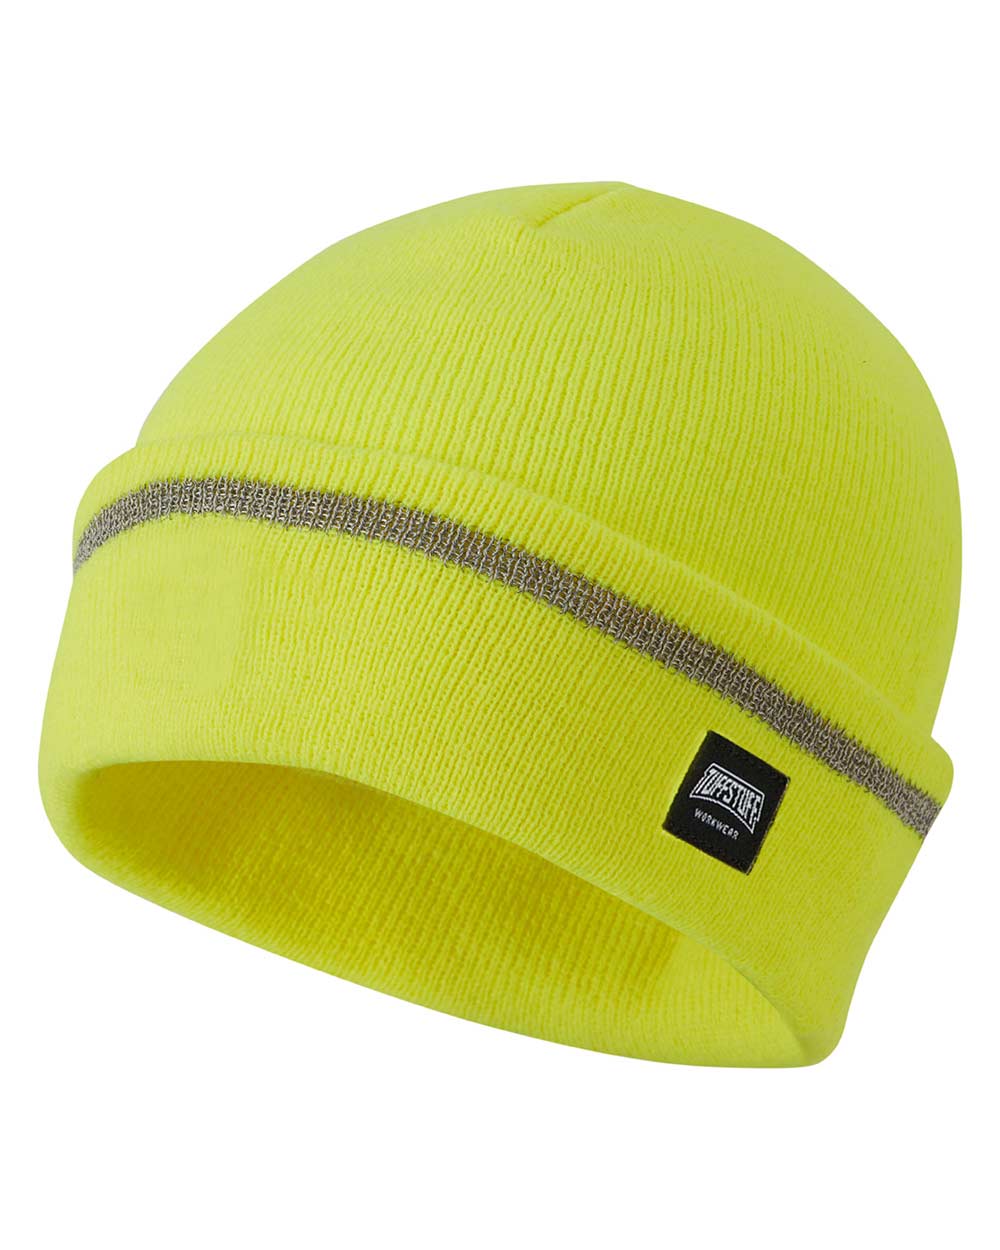 TuffStuff Reflective Thinsulate Beanie in fluorescent yellow